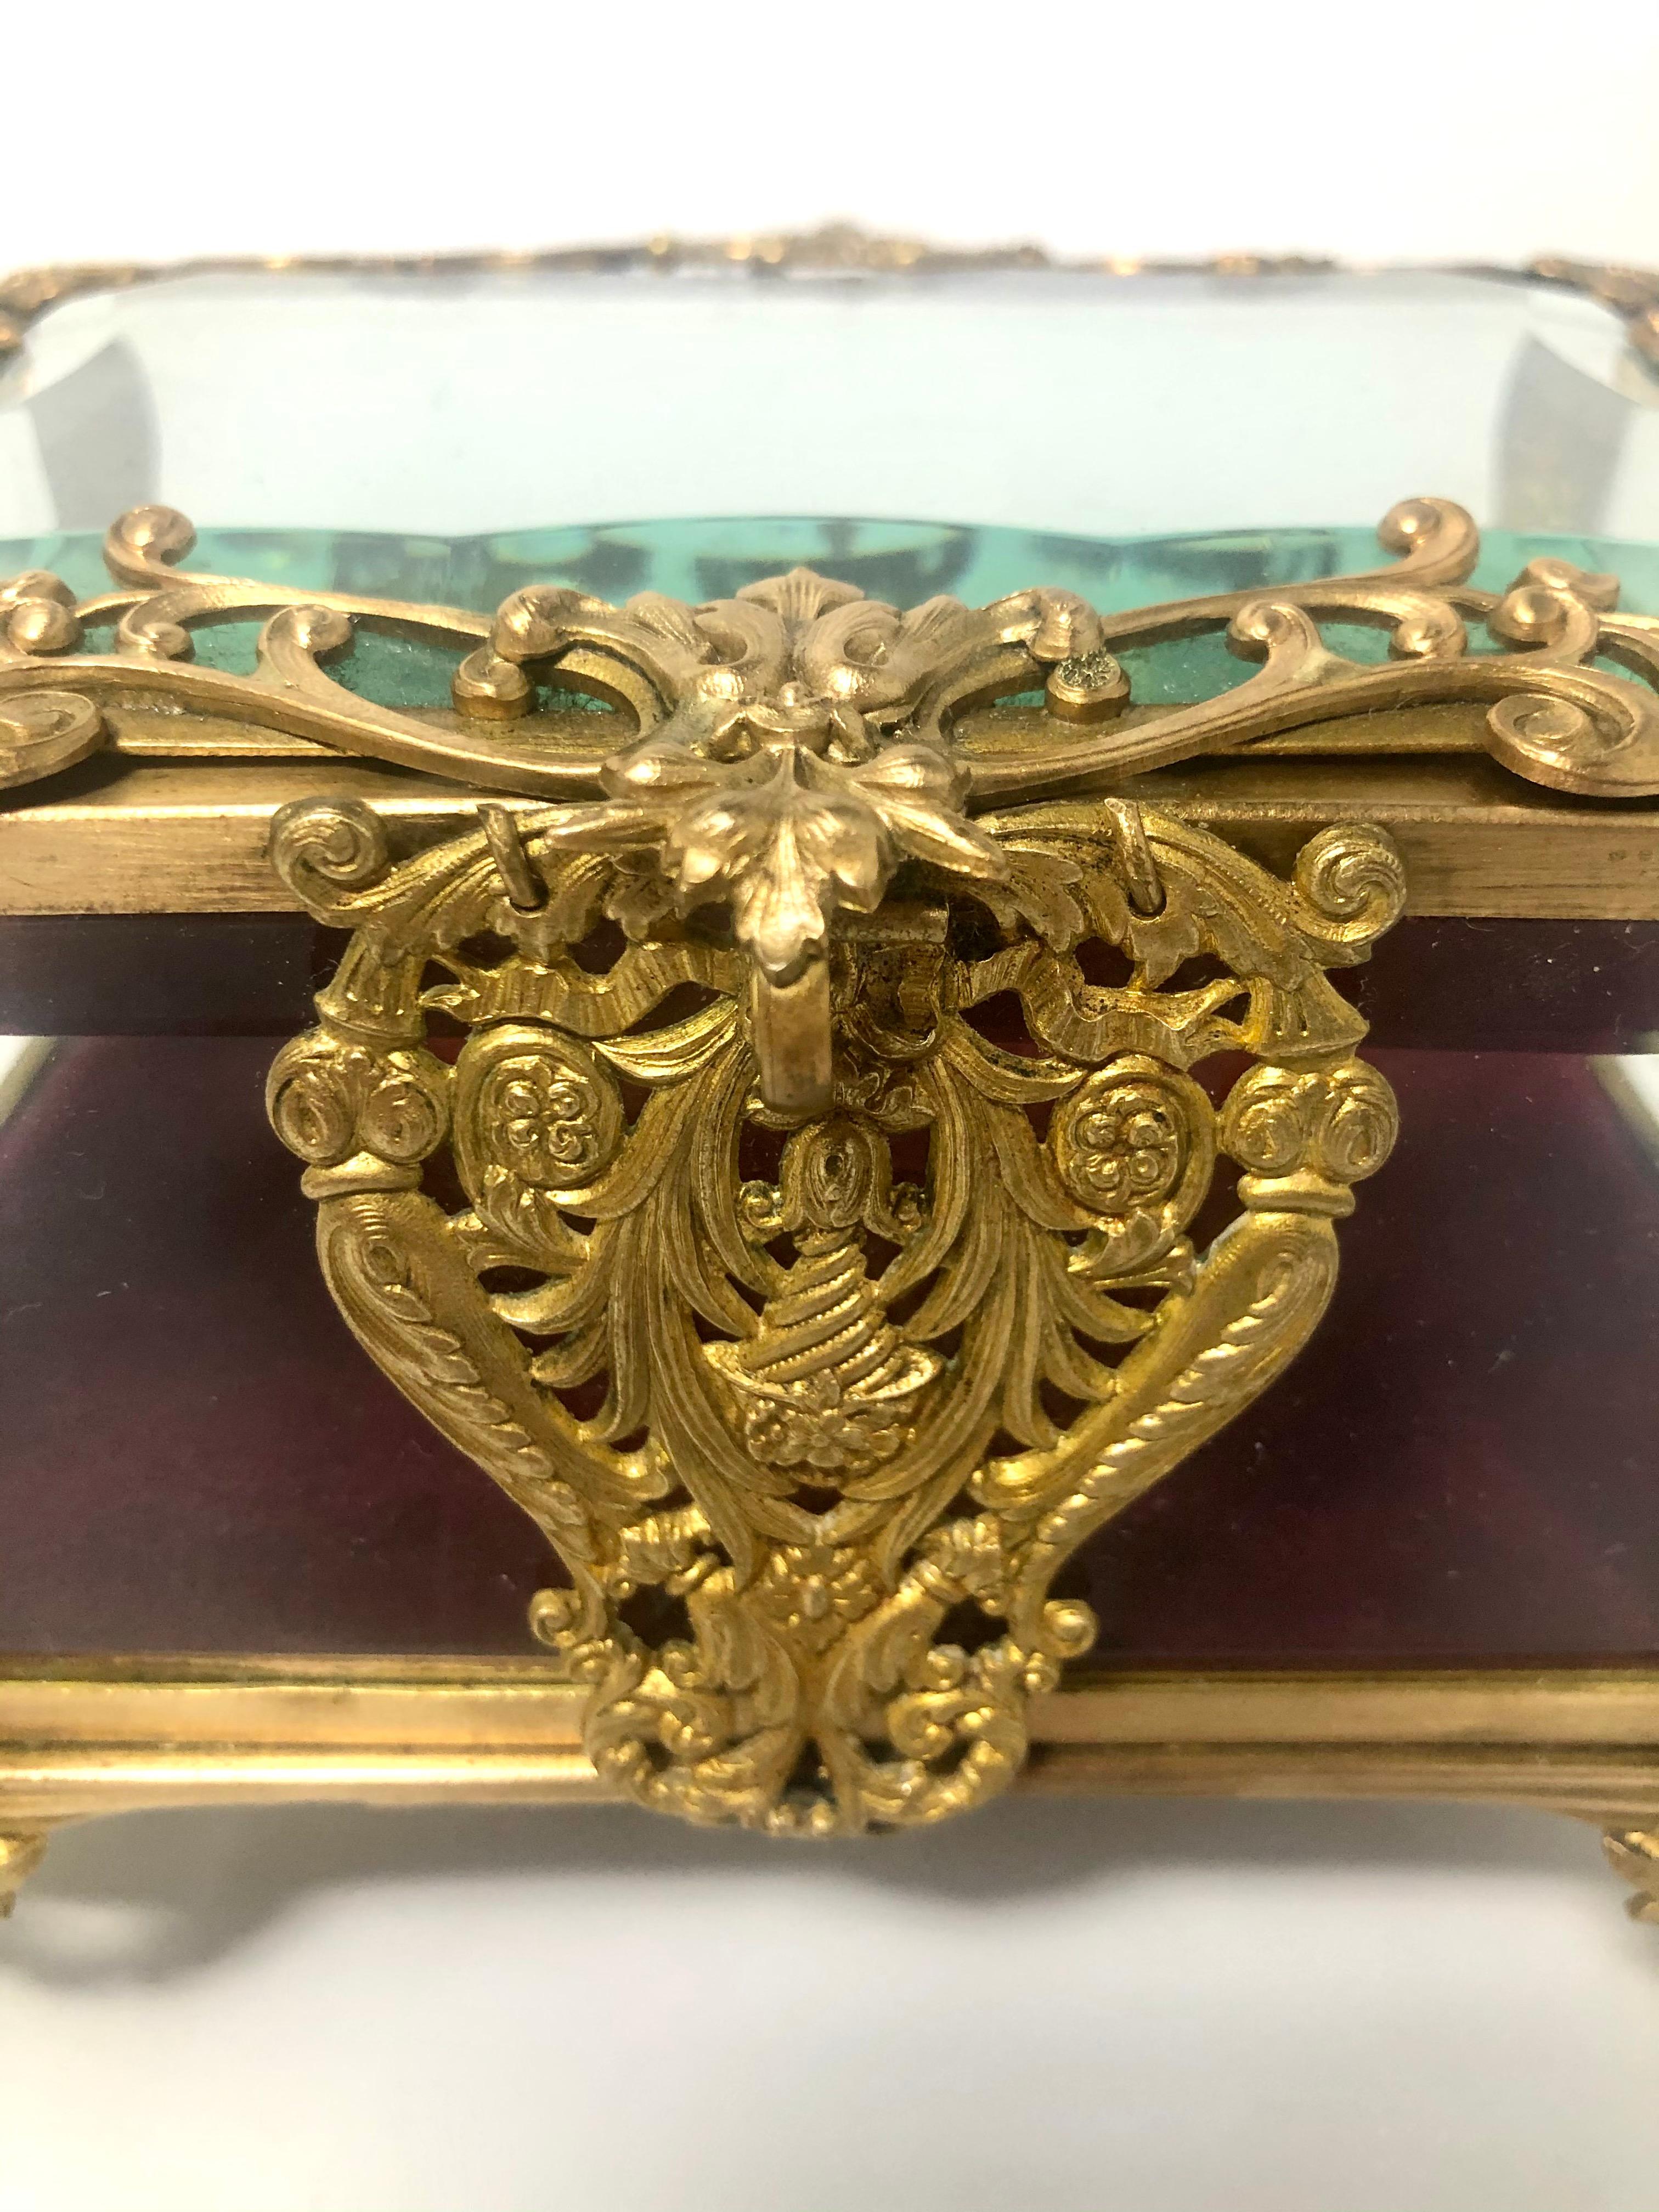 20th Century Antique French Art Nouveau Gold Bronze and Crystal Footed Jewel Box, Circa 1900